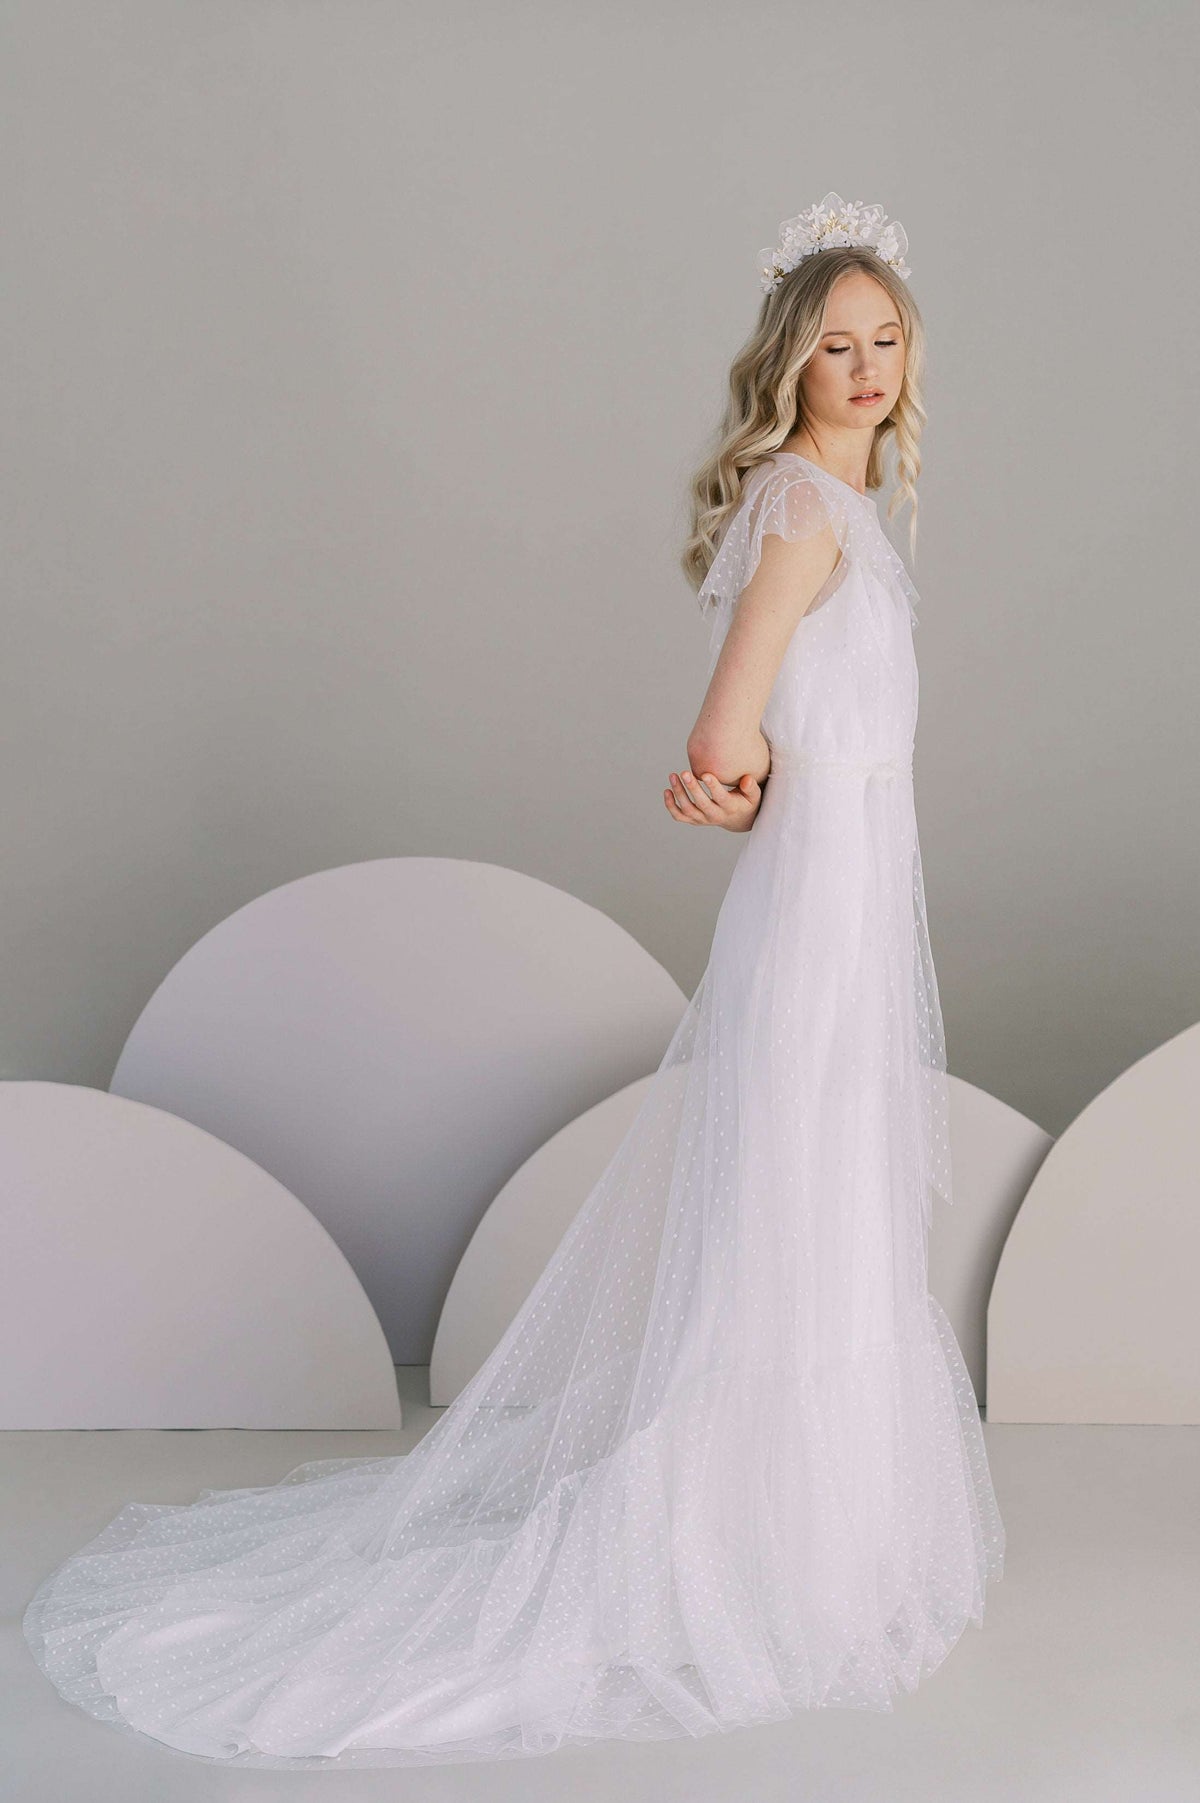 Understated slip wedding dress with a low v back. Available in silk or eco crepe. Shown with the Alsking dotted tulle overdress.Made to order by Catherine Langlois, Toronto, Canada.